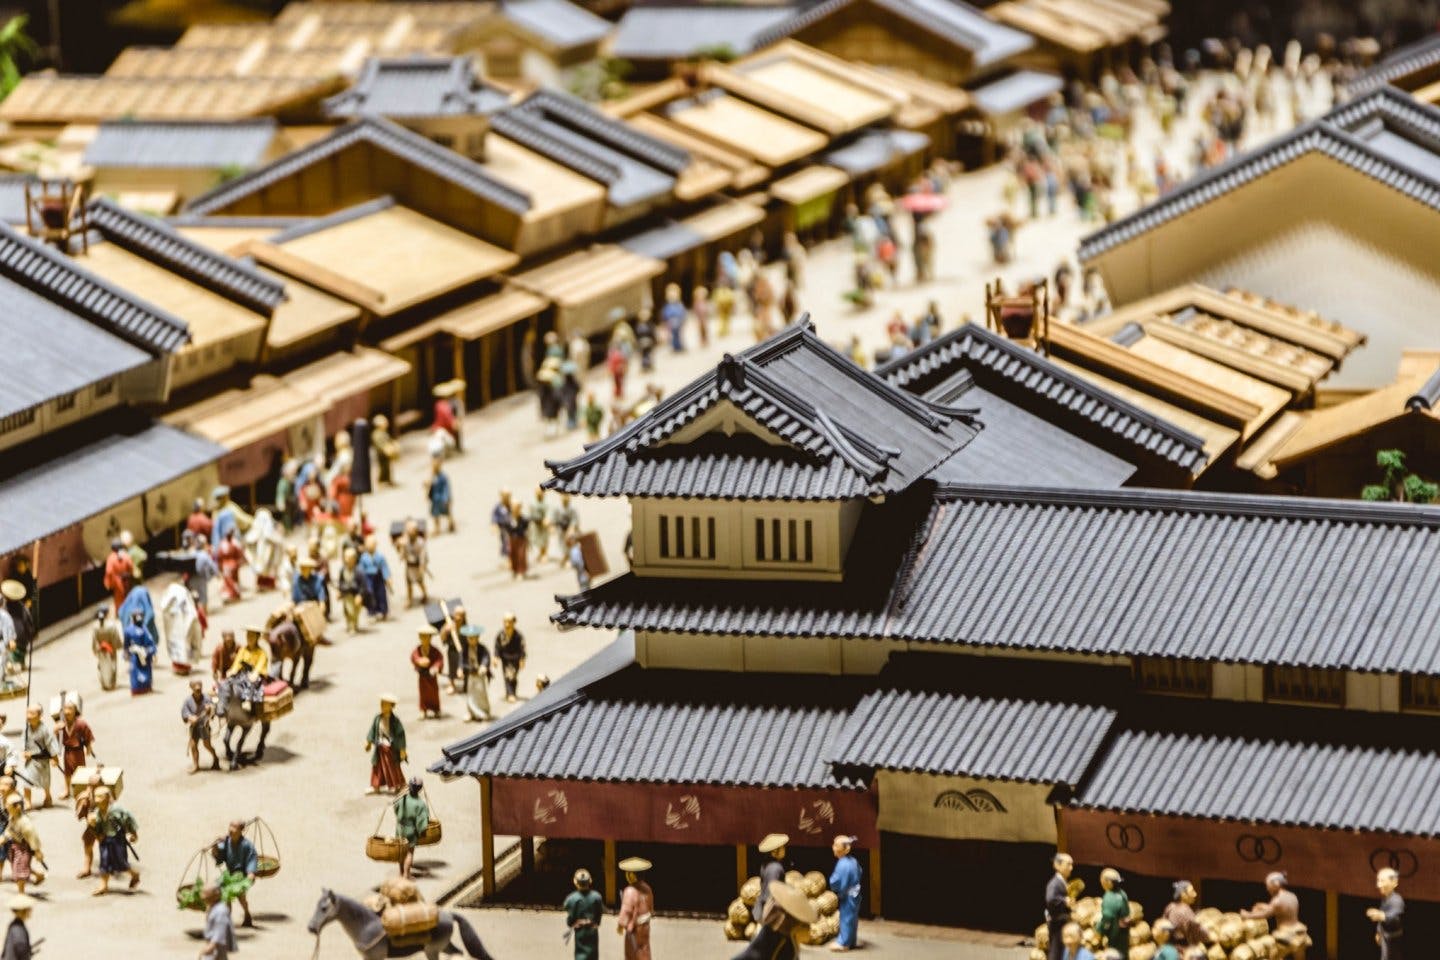 Small scale models of Edo-period Tokyo at the Edo-Tokyo Museum in Sumida